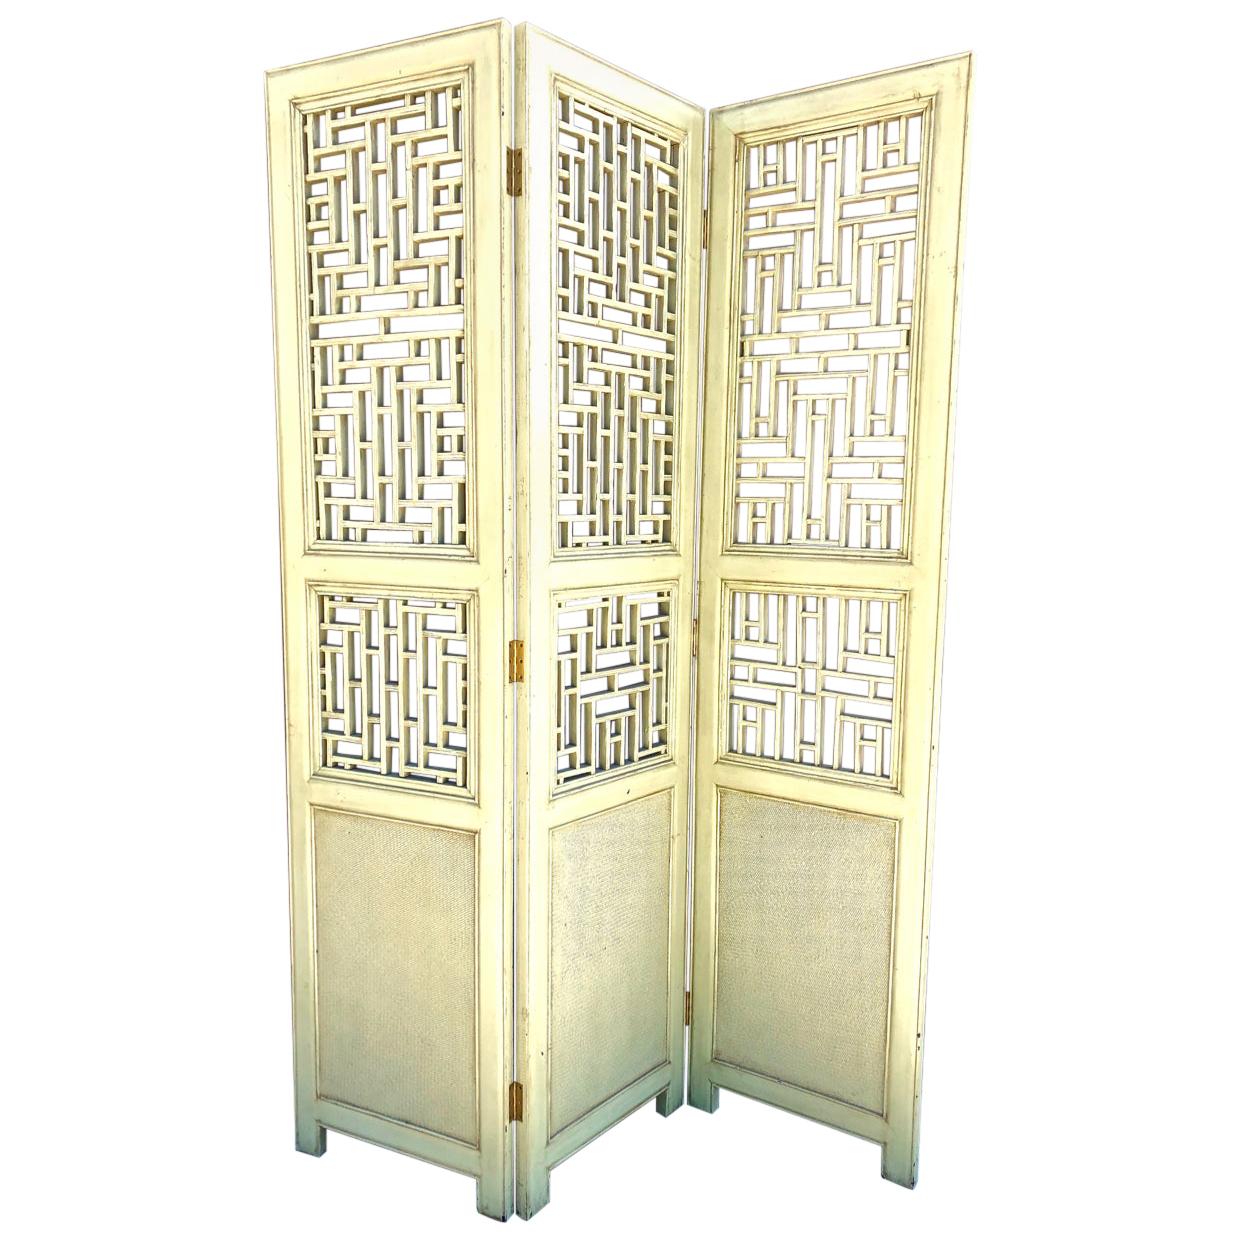 Antique Chinese Fretwork Screen